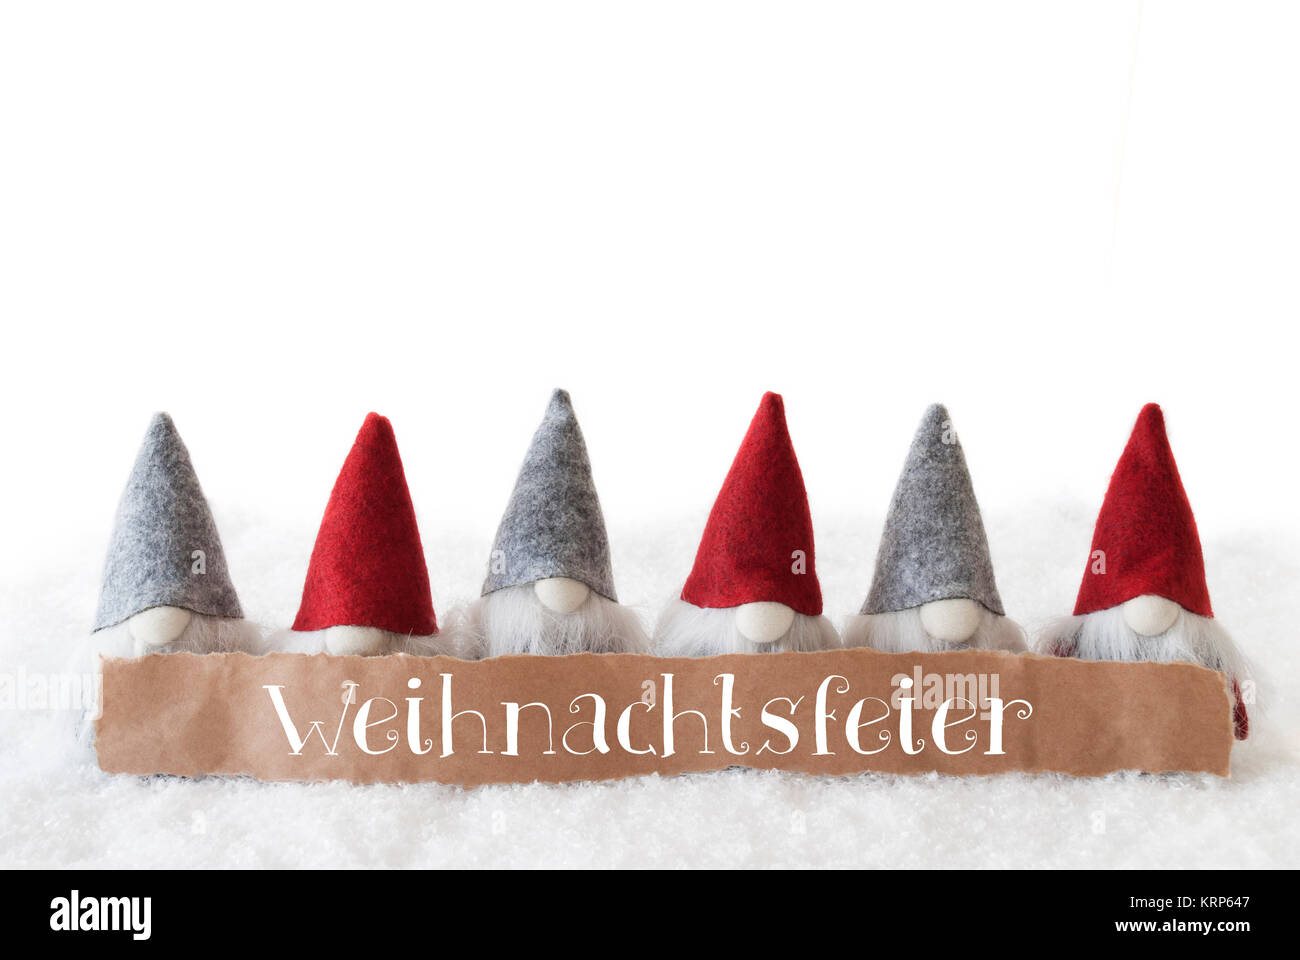 Label With German Text Weihnachtsfeier Means Christmas Party. Christmas Greeting Card With Gnomes. Isolated White Background With Snow. Stock Photo